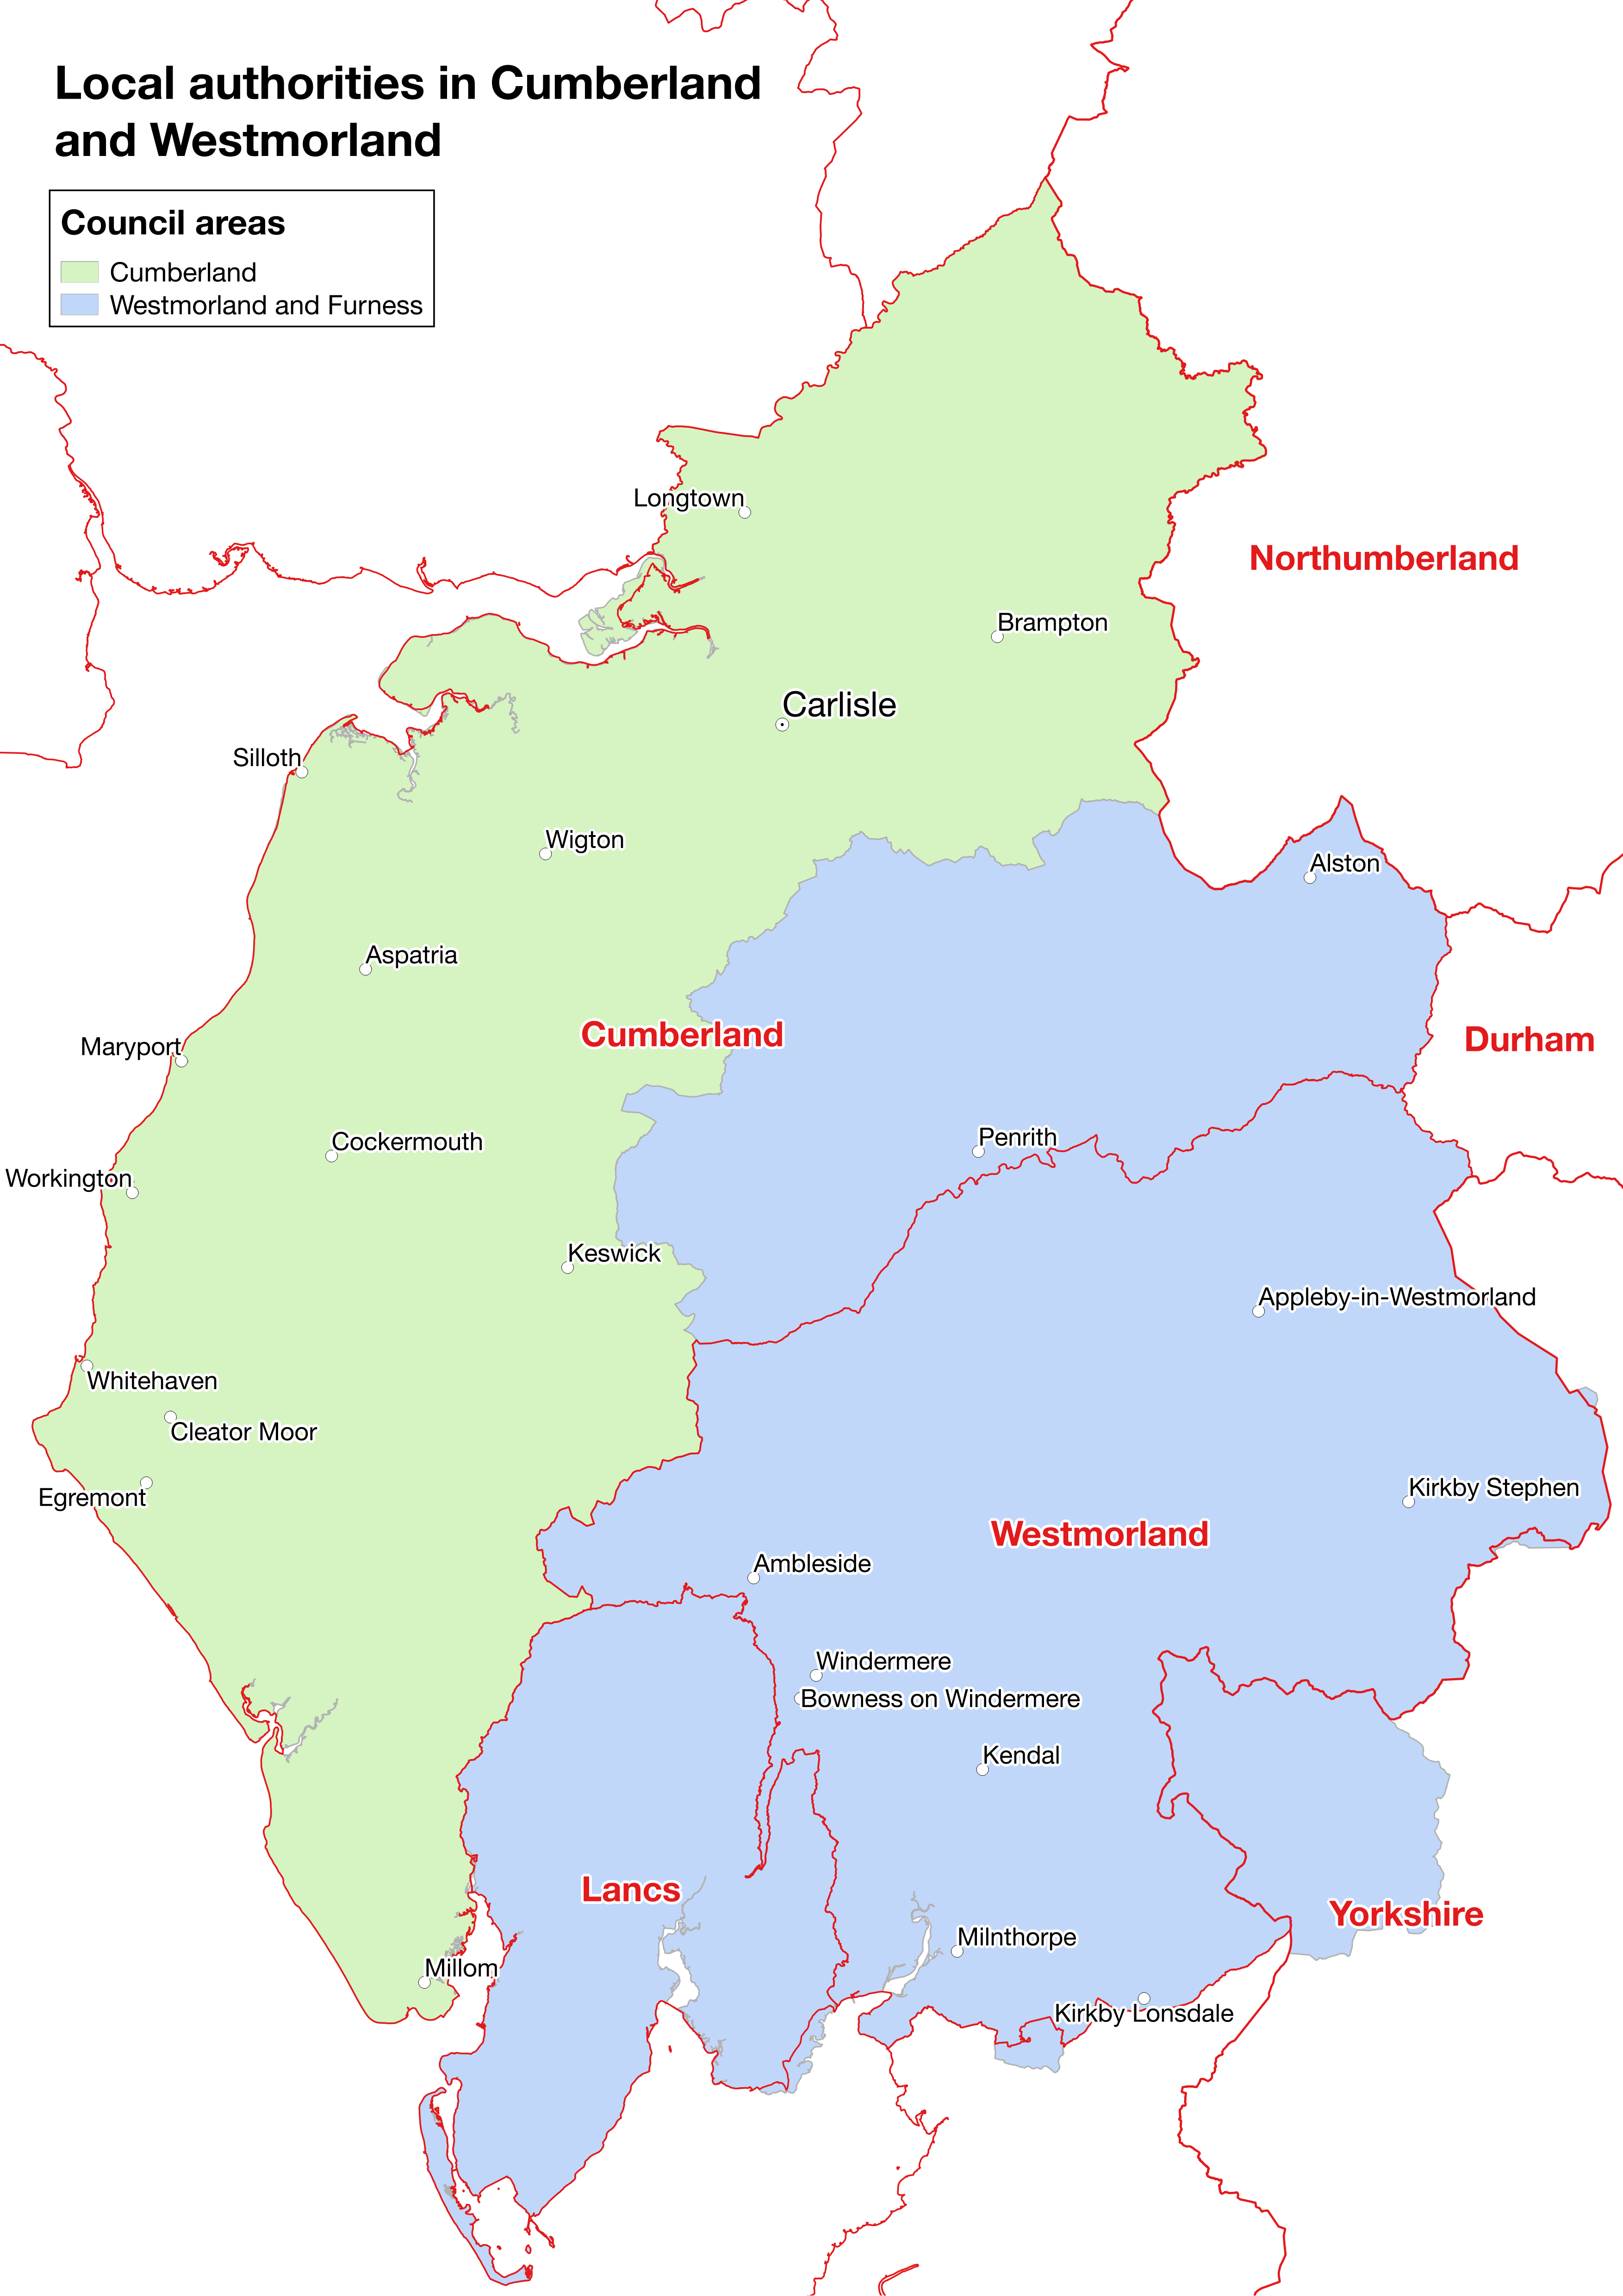 LG Map of CUmberland Council, Westmorland and Furness council